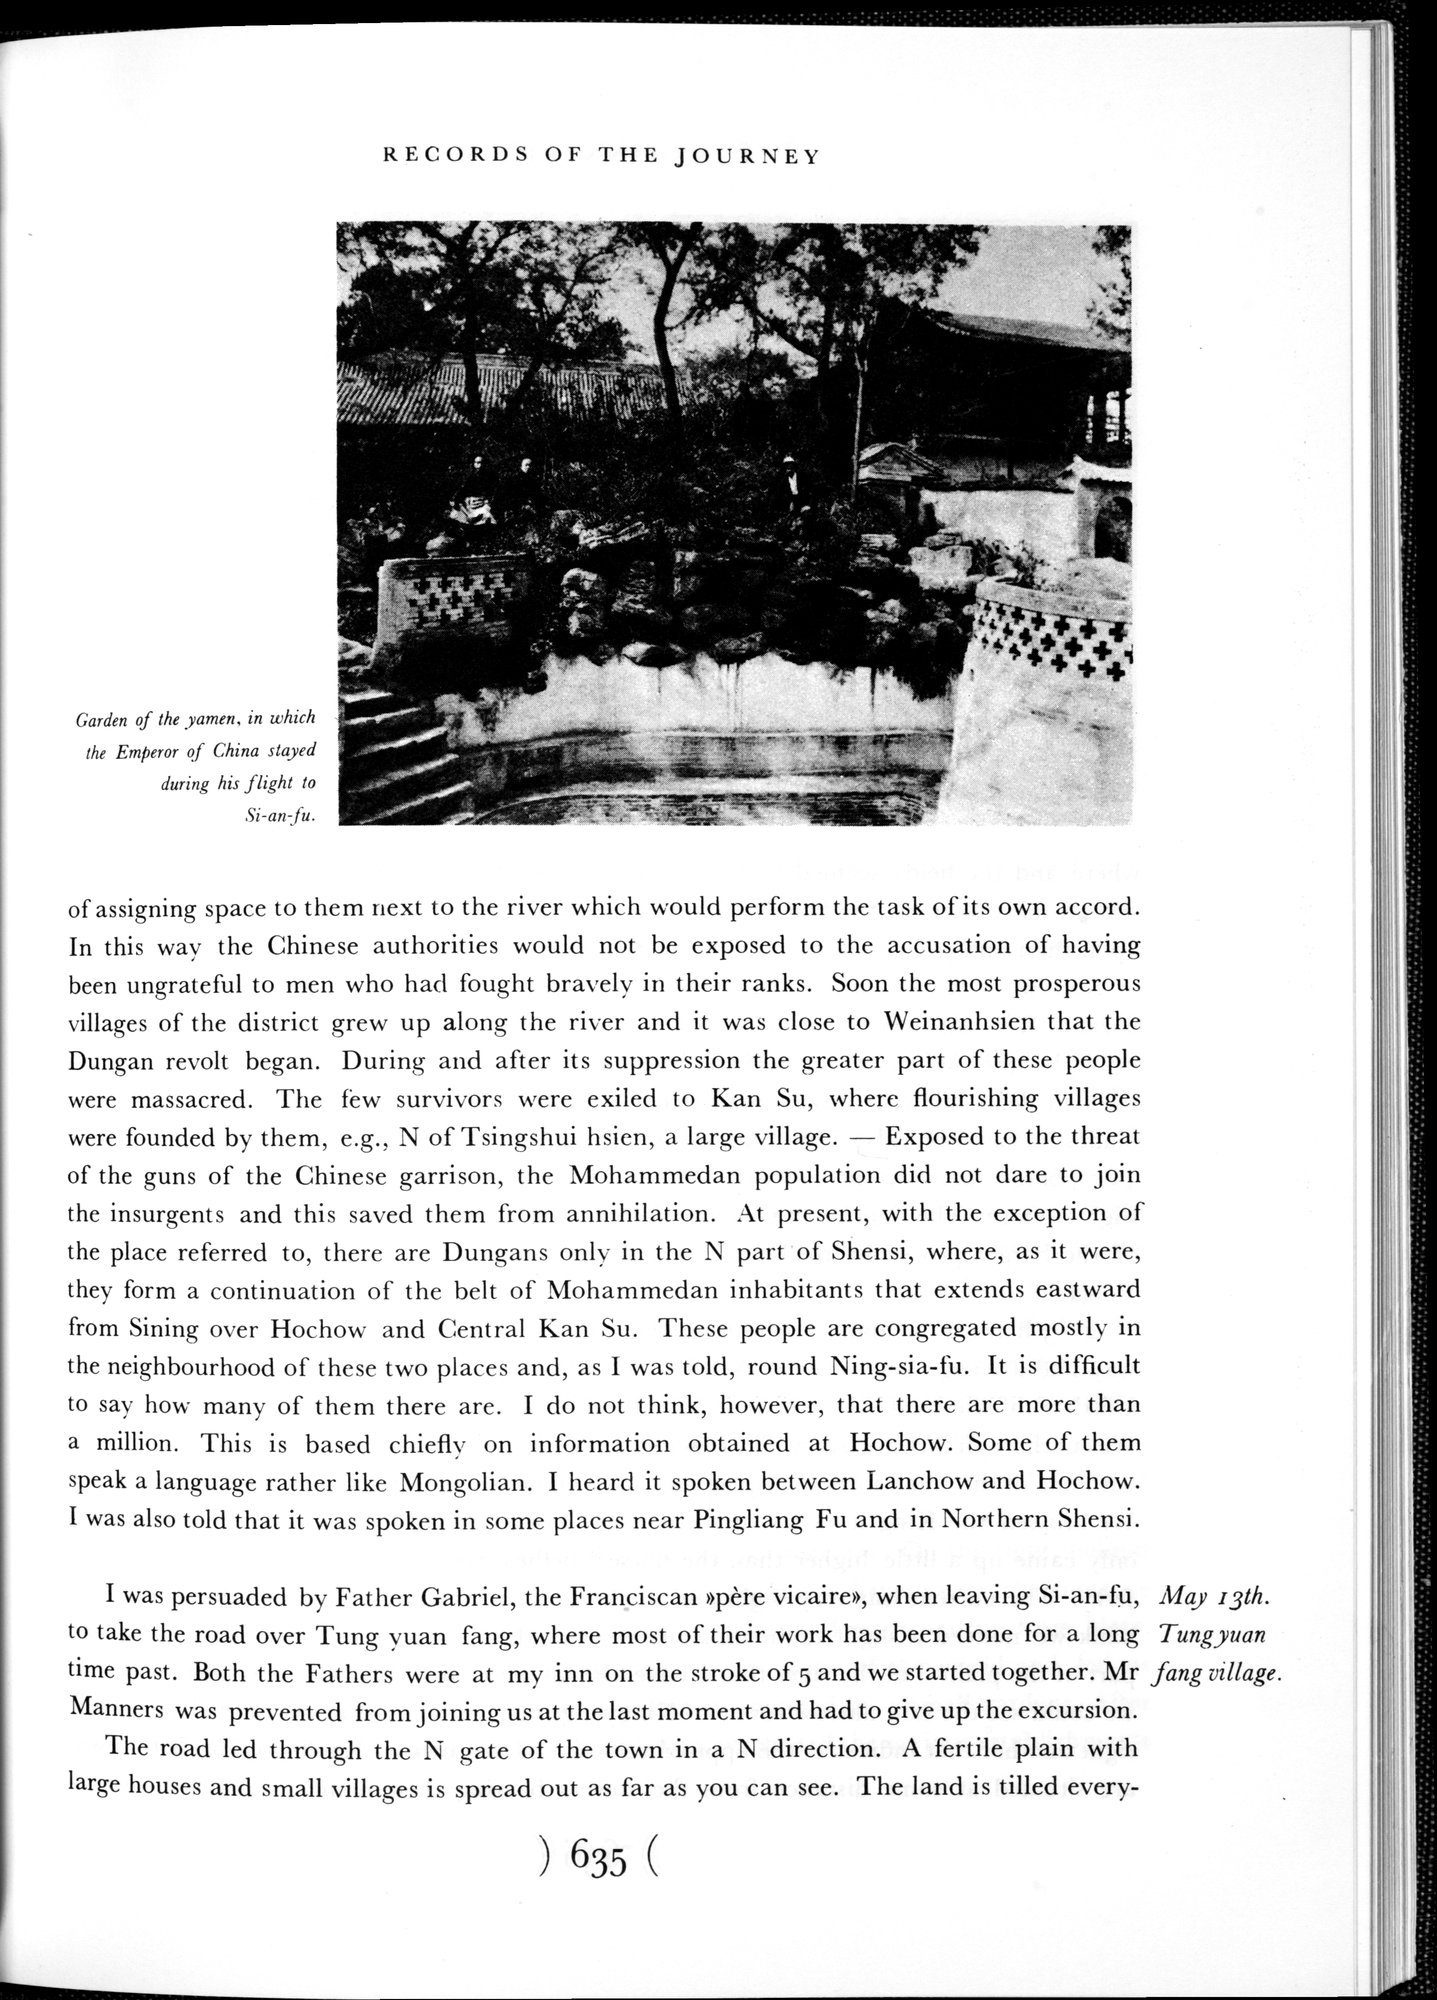 Across Asia : vol.1 / Page 641 (Grayscale High Resolution Image)